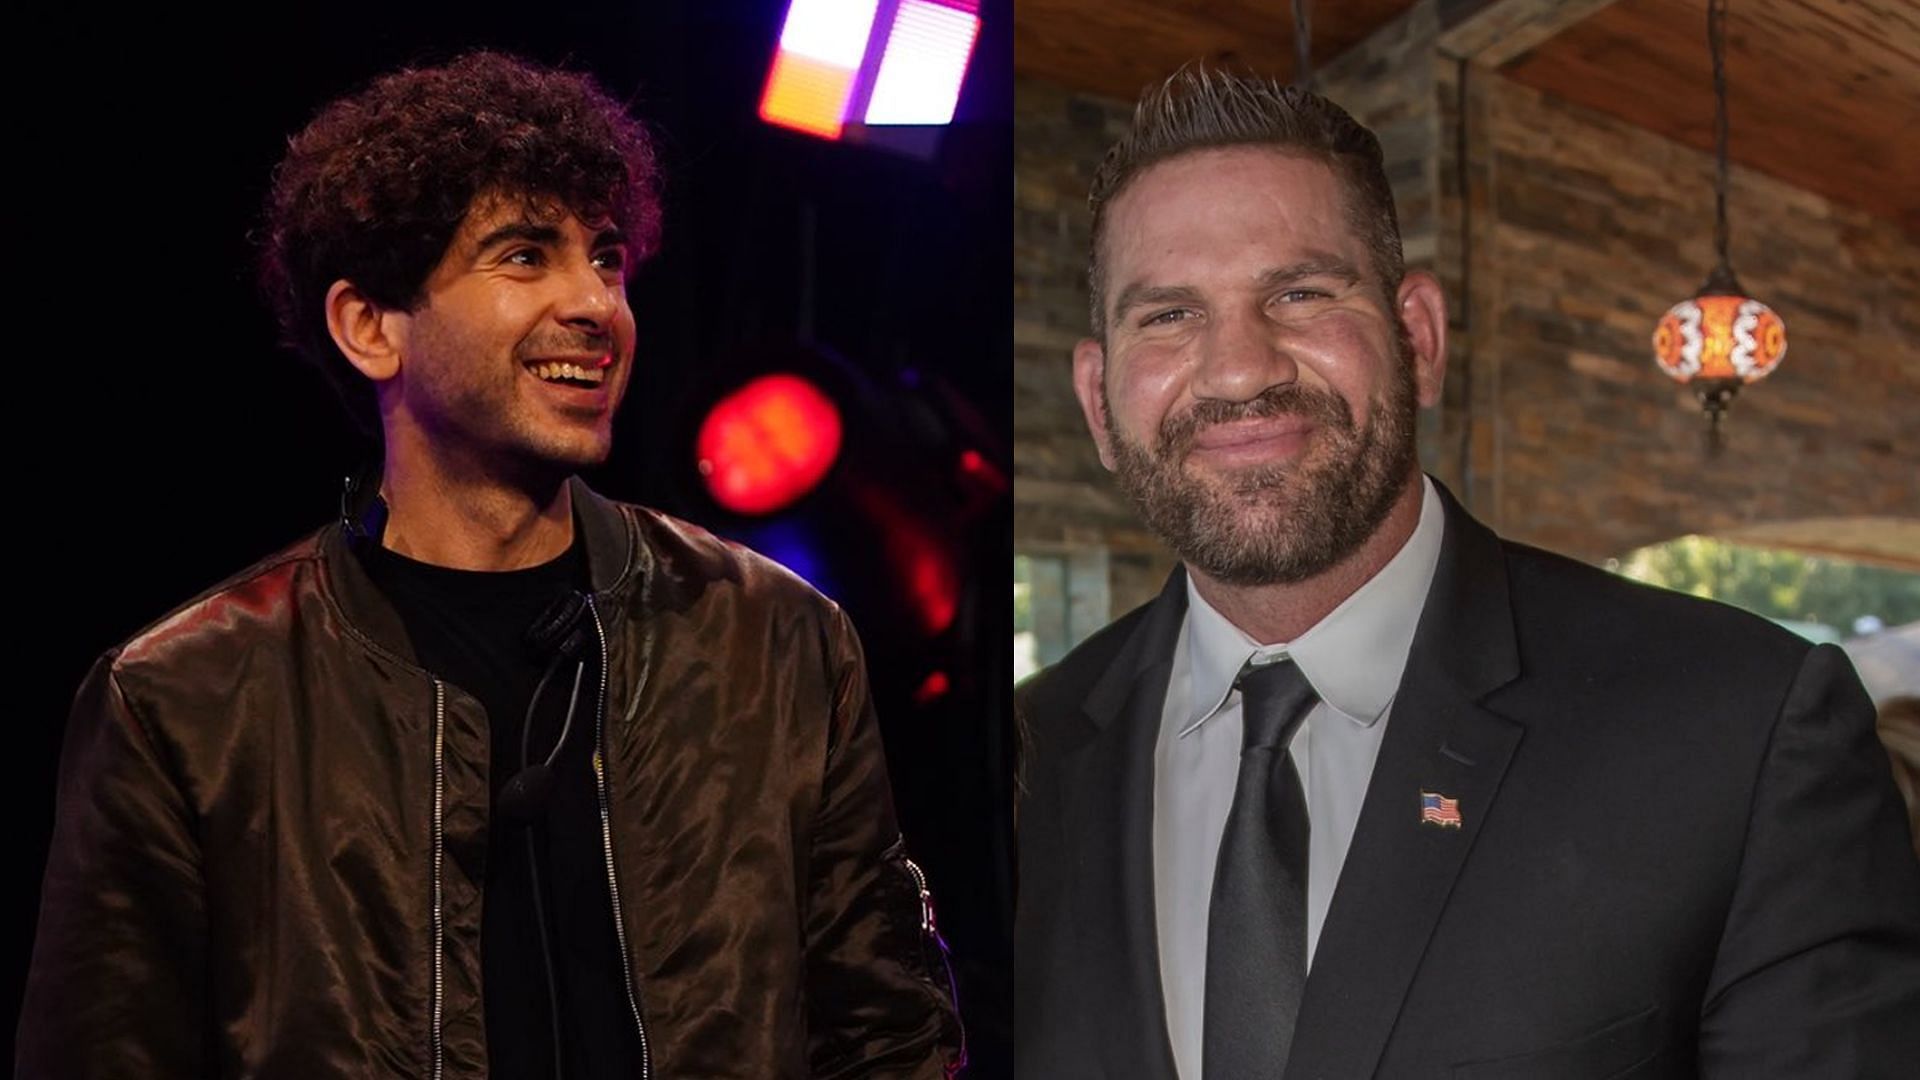 Tony Khan is the current AEW President while Matt Morgan was a former WWE star